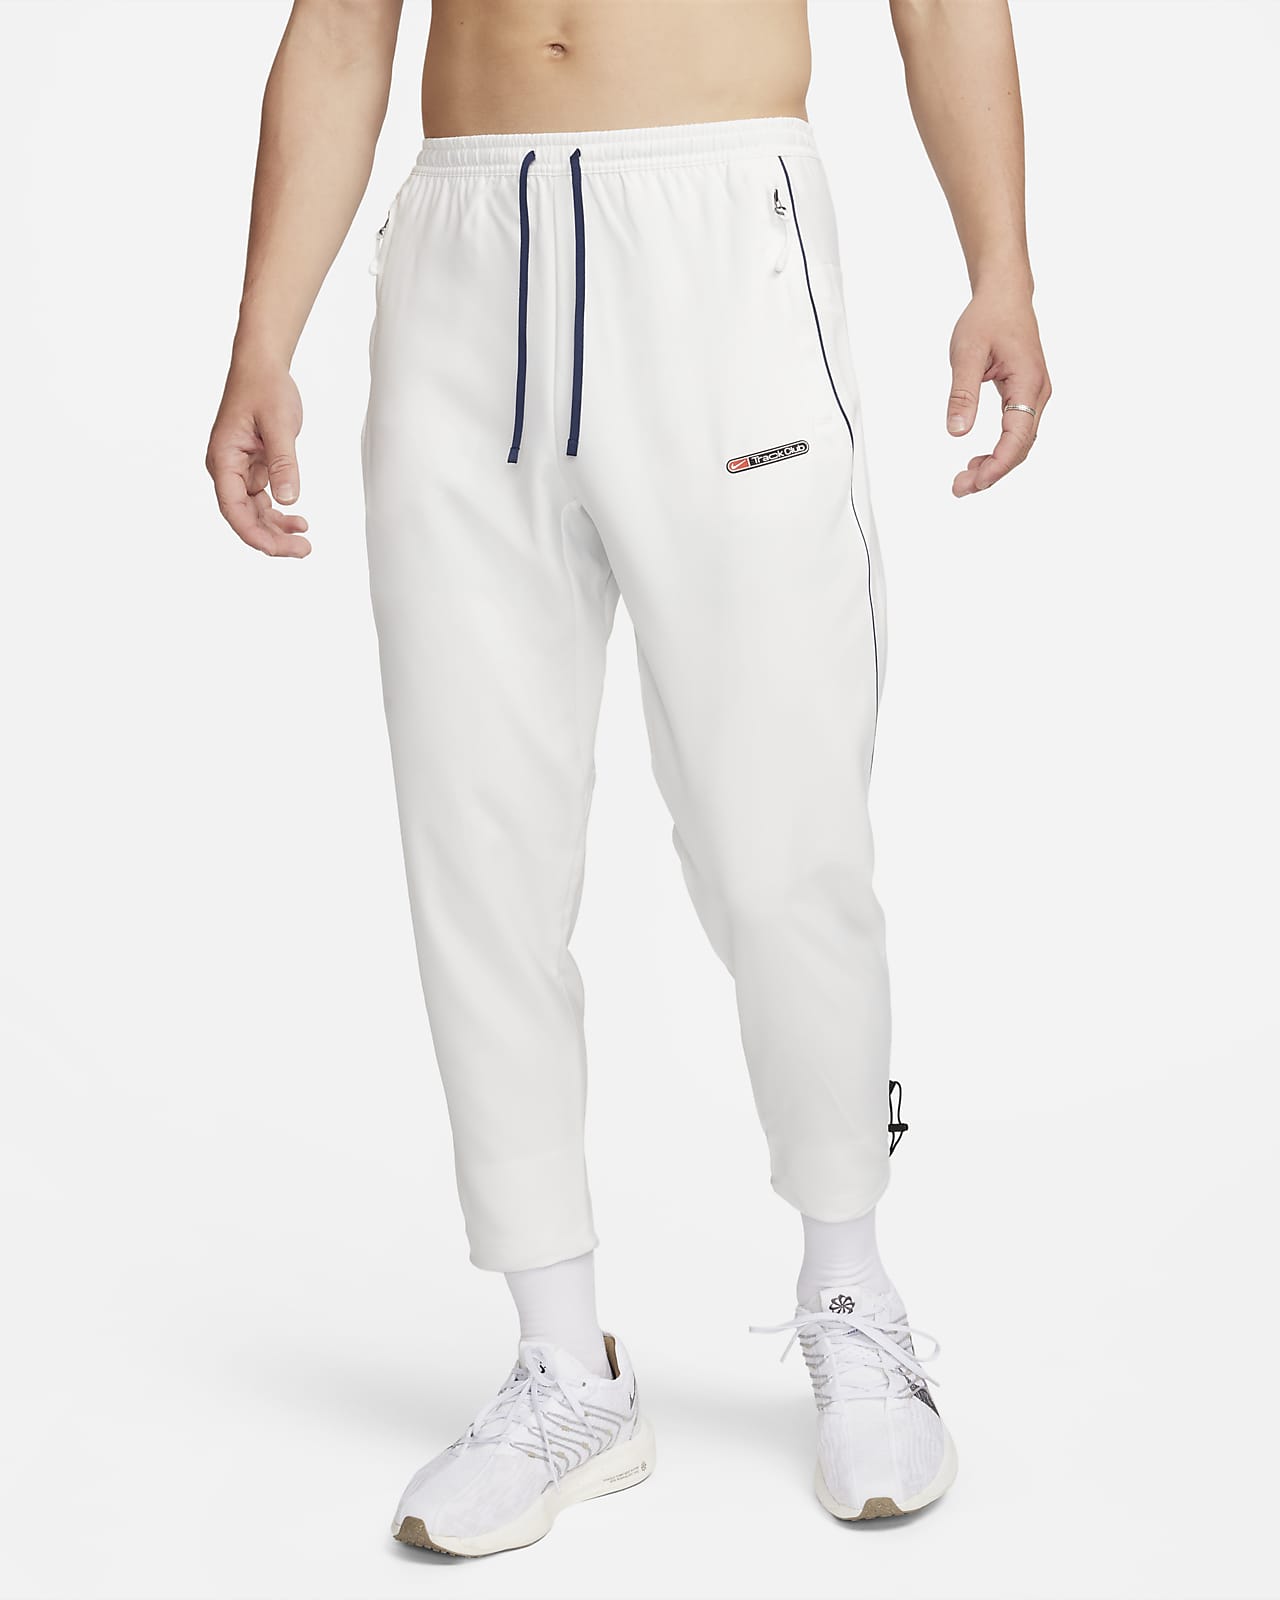 Nike Challenger Track Club Men's Dri-FIT Running Trousers